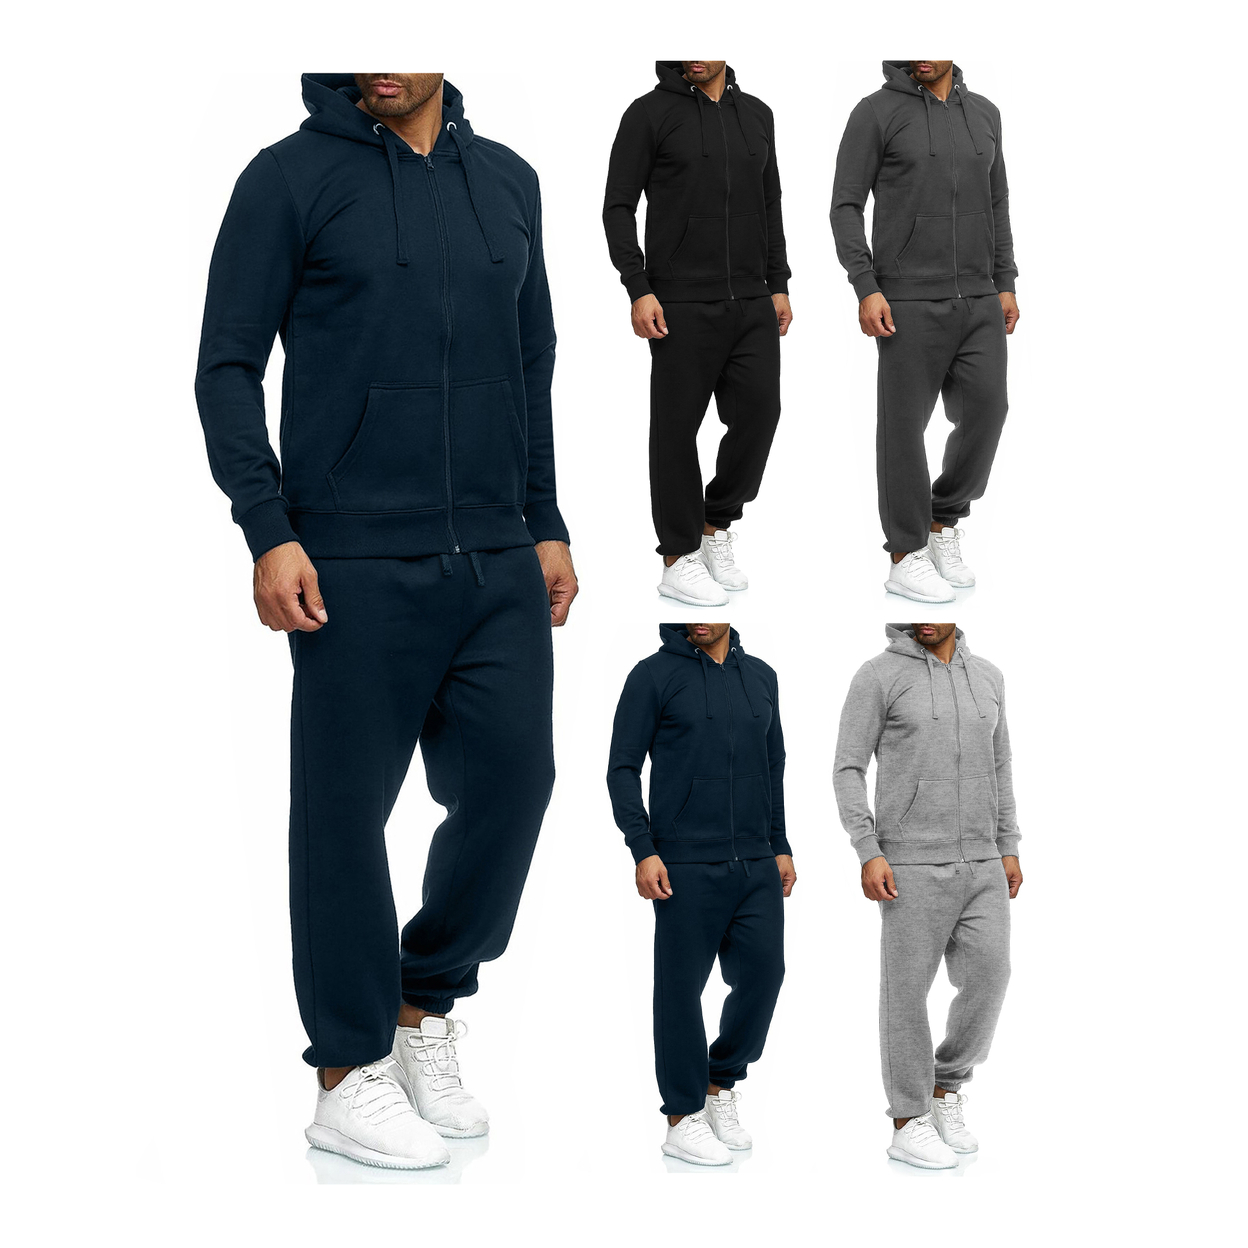 Men's Casual Big & Tall Athletic Active Winter Warm Fleece Lined Full Zip Tracksuit Jogger Set - Navy, Xx-large